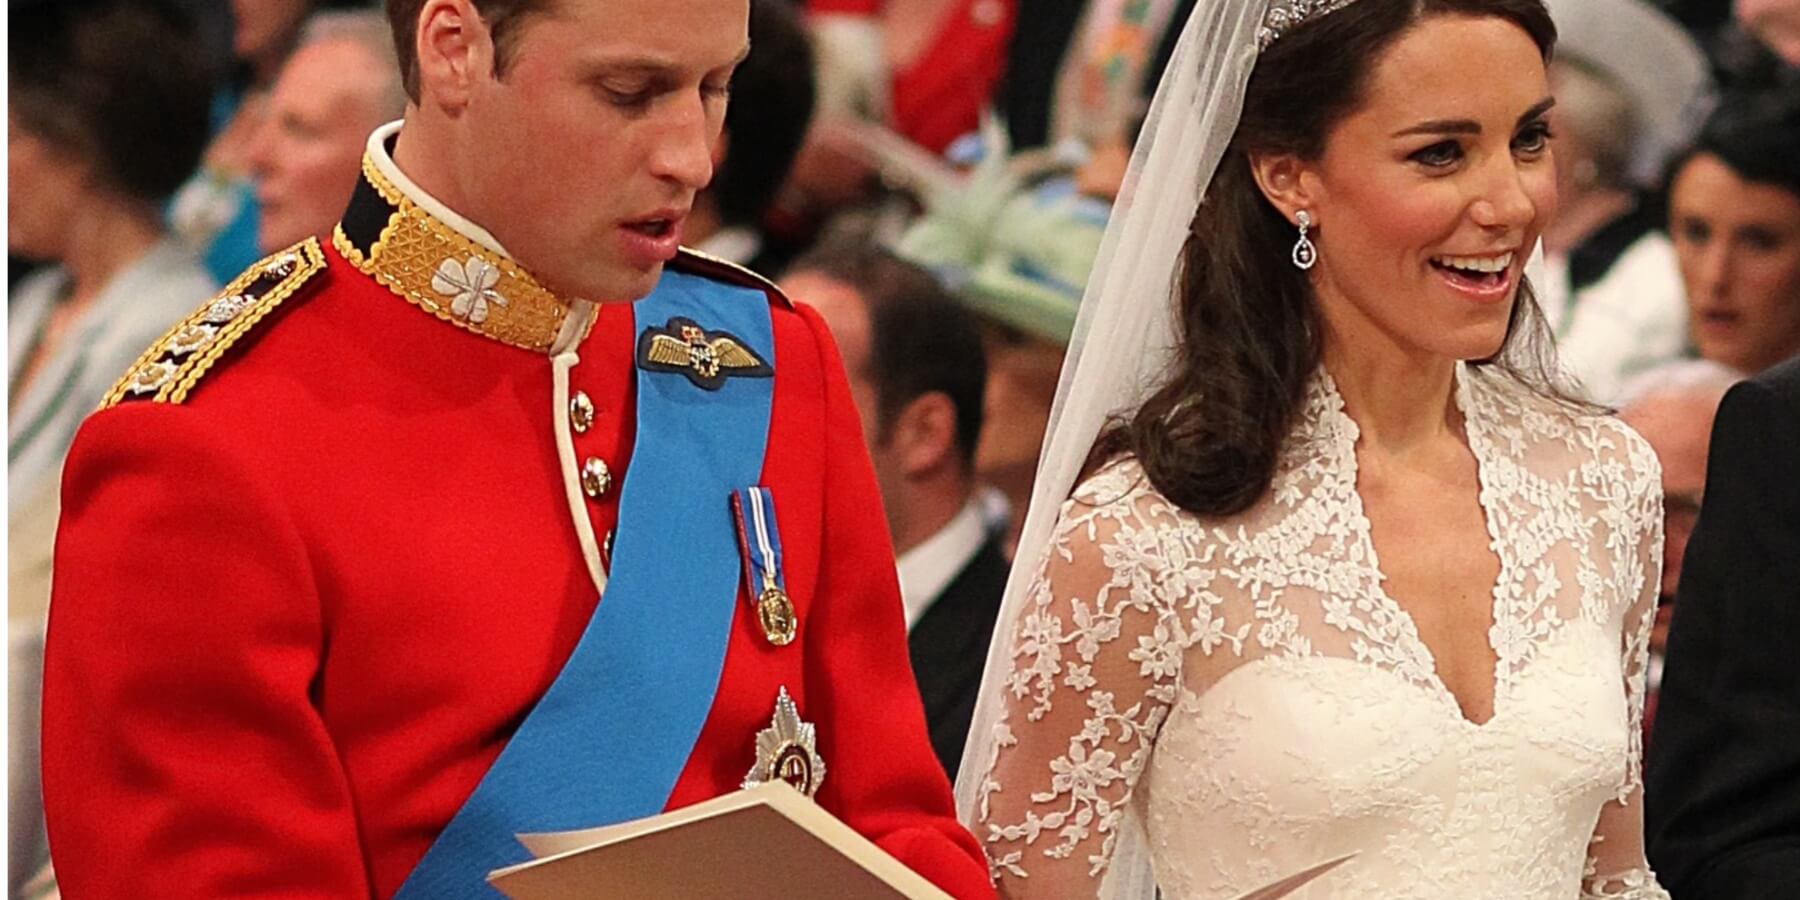 Kate Middleton and Prince William sing selections from their 2011 wedding ceremony